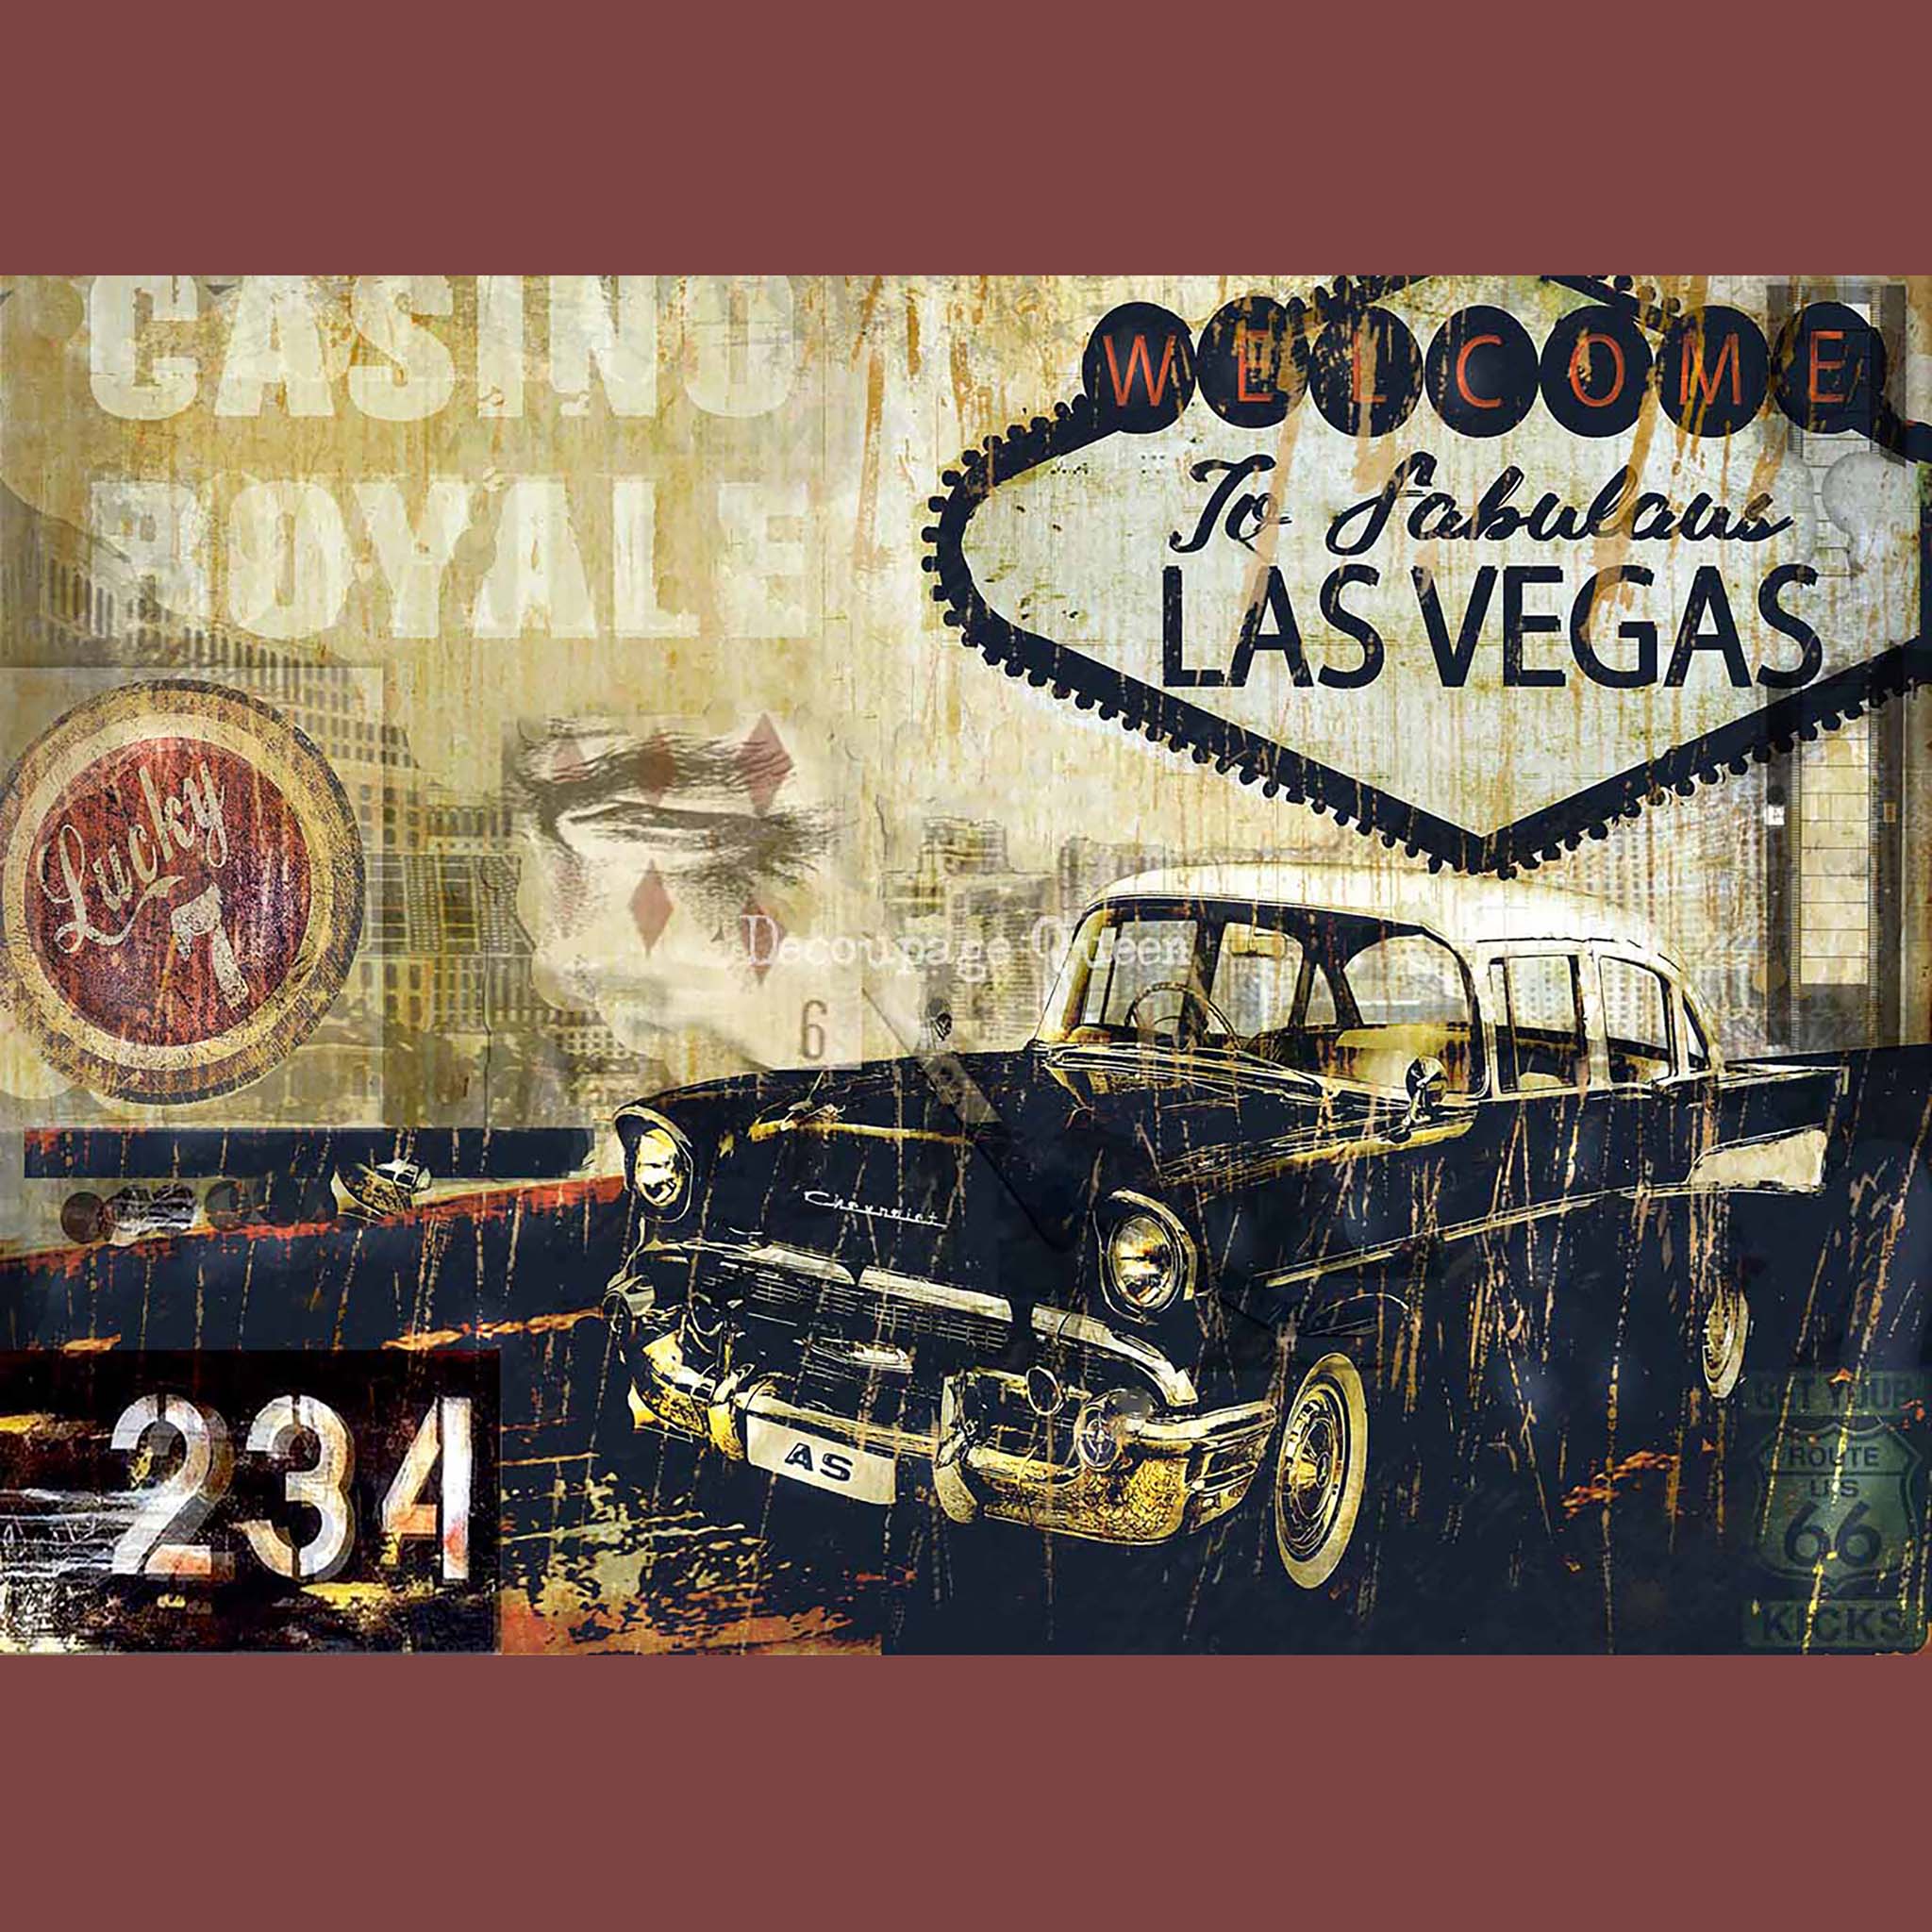 Rice paper design featuring the iconic Welcome to Las Vegas sign above an antique car. Soft burgundy borders are on the top and bottom.